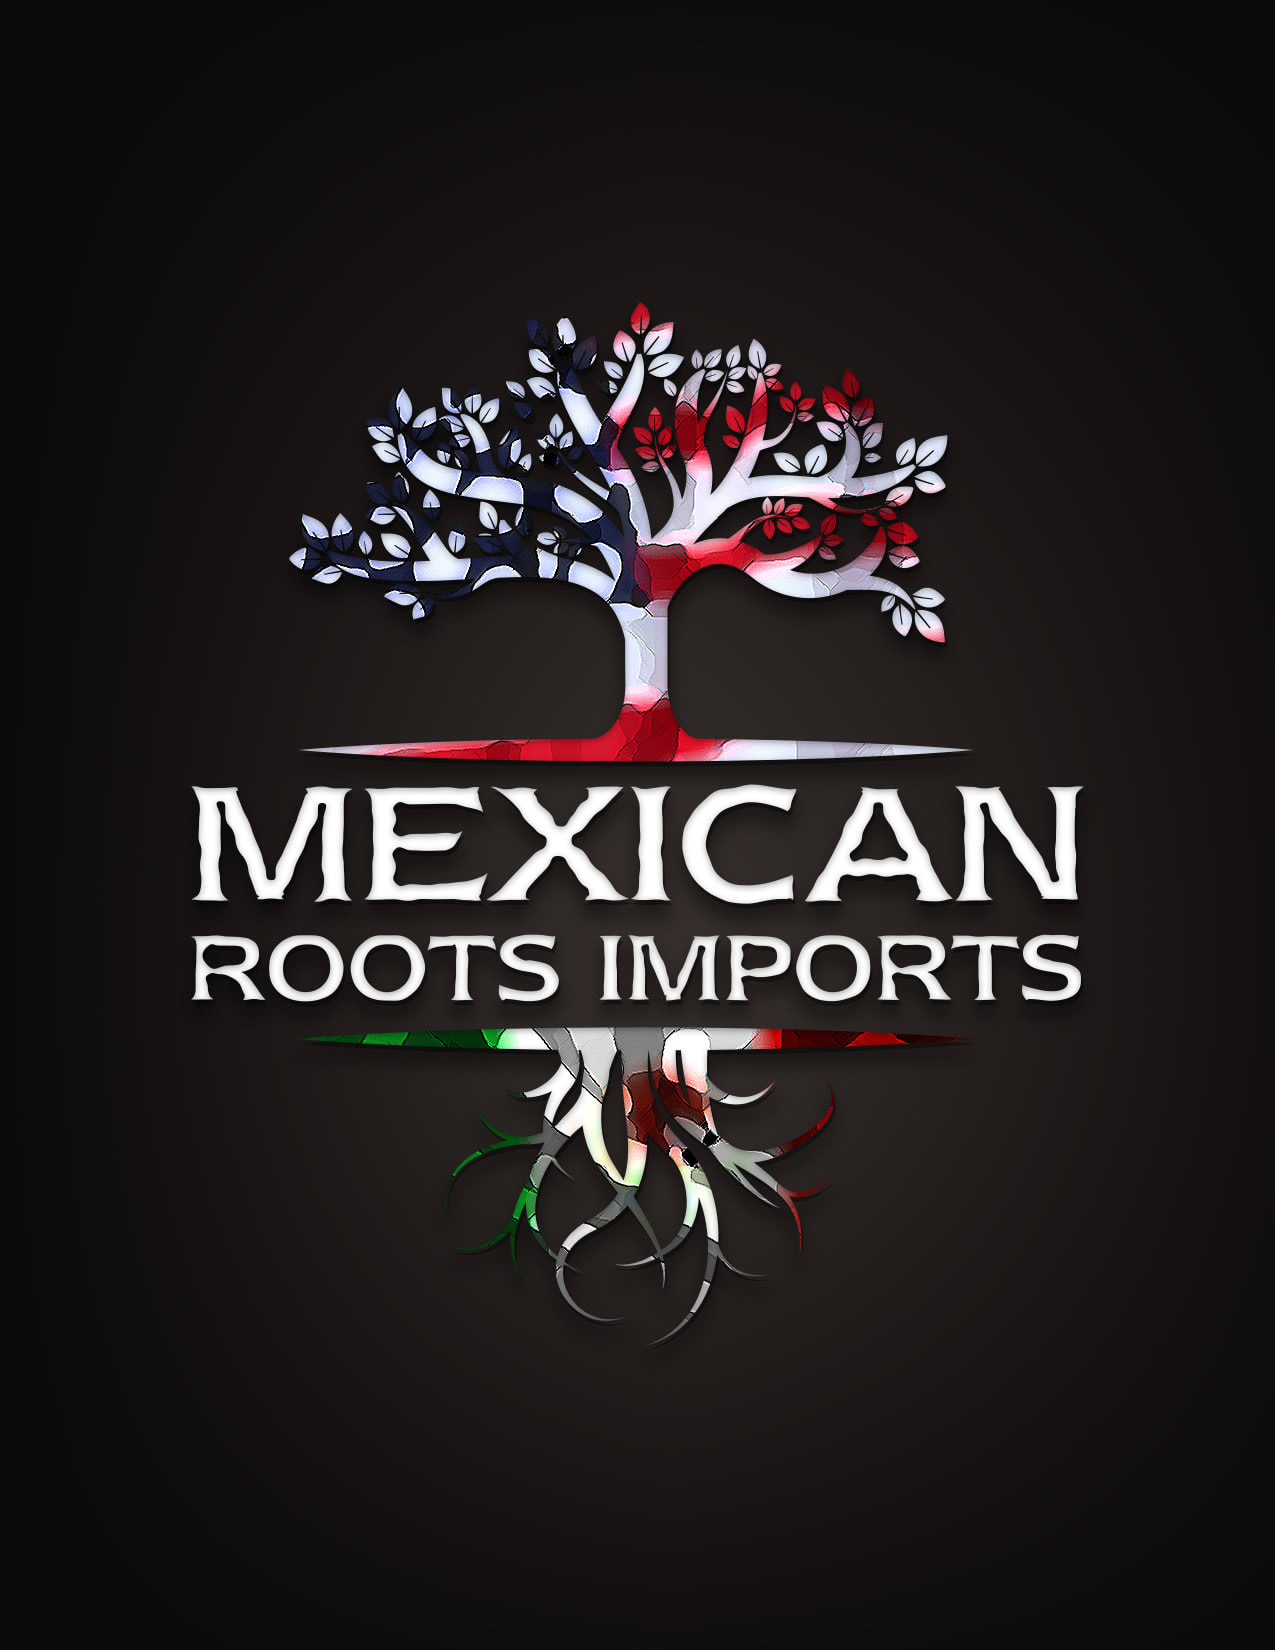 Mexican Roots Imports